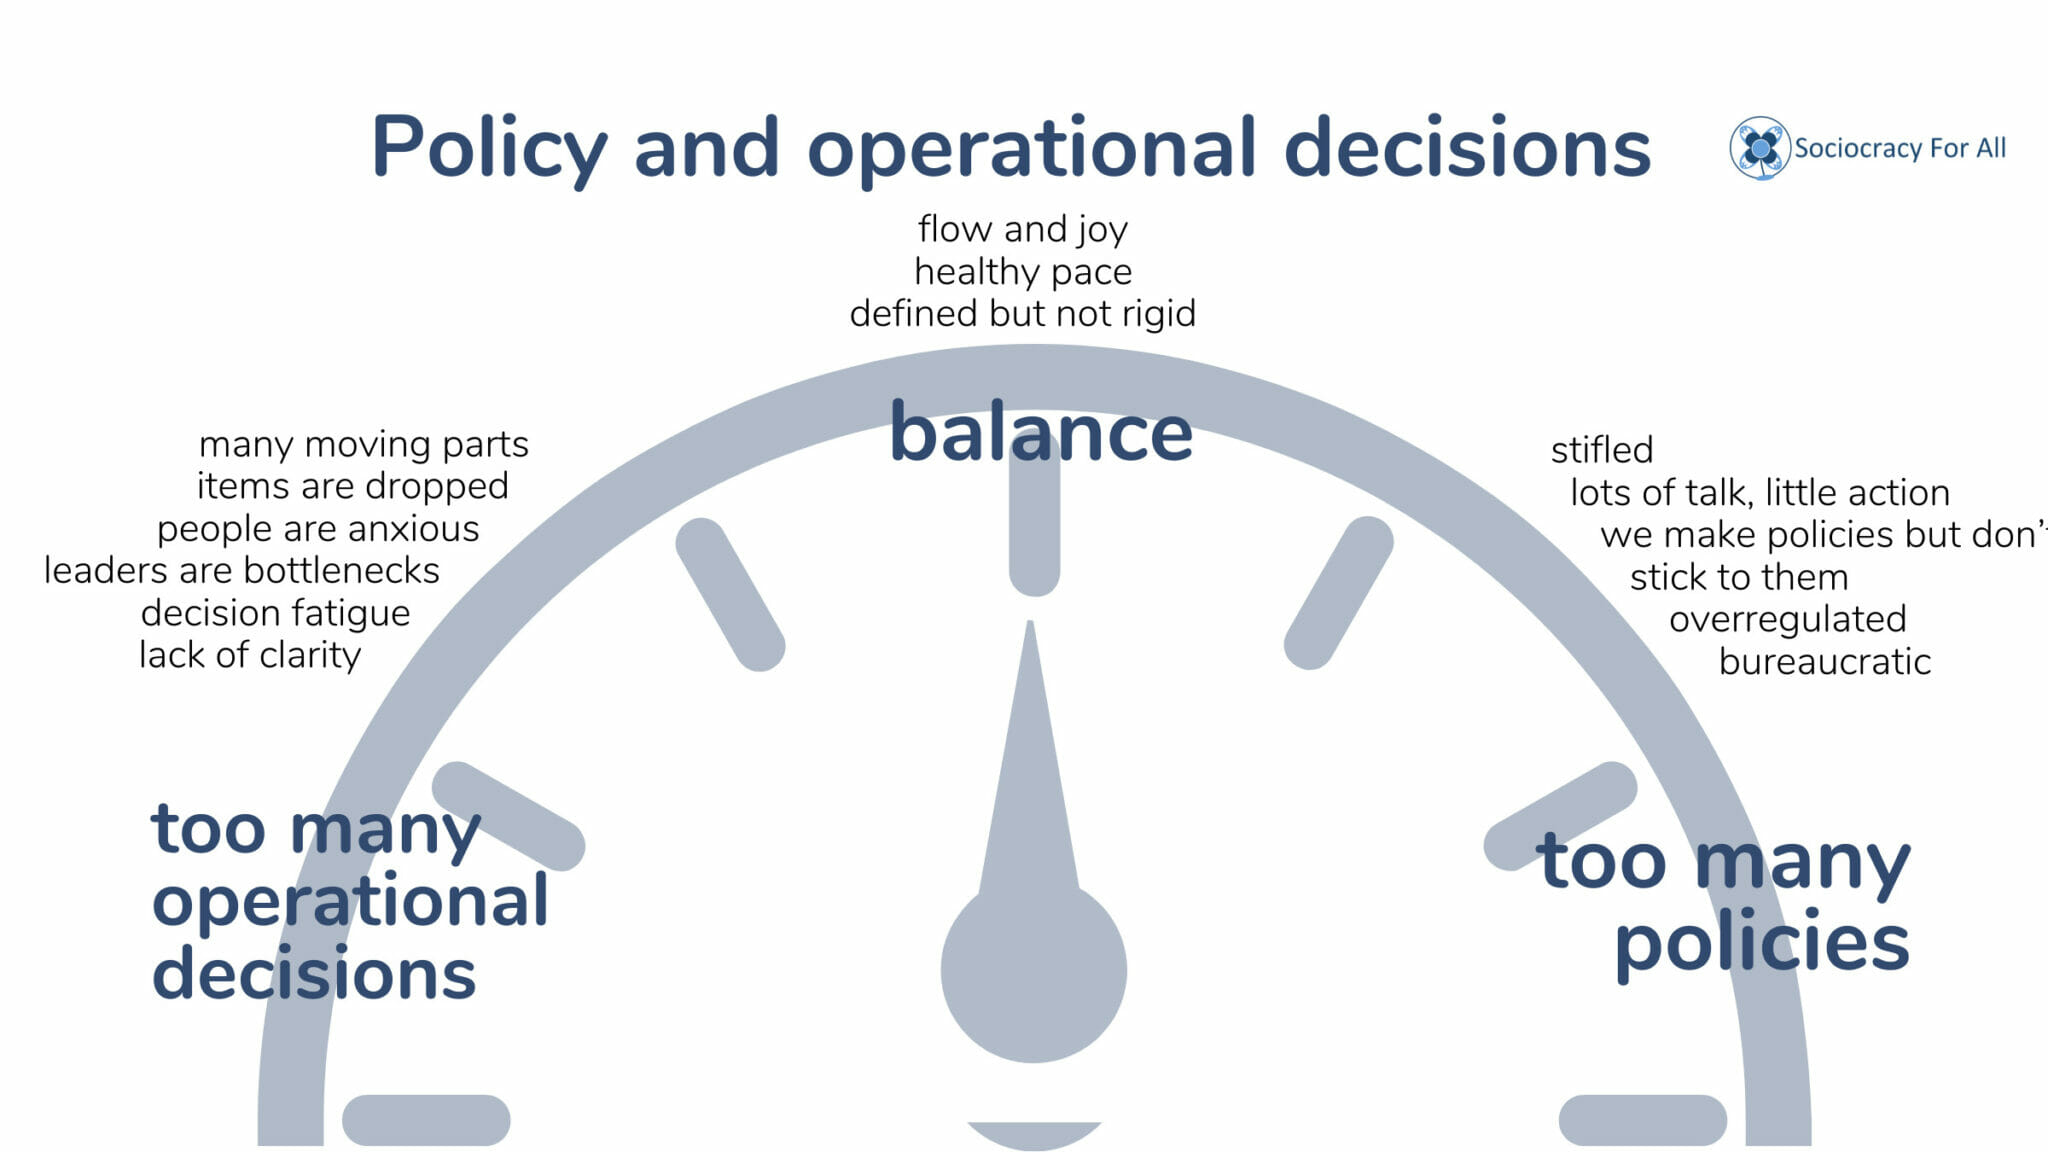 policy operations 2 - sociocracy business - Sociocracy For All